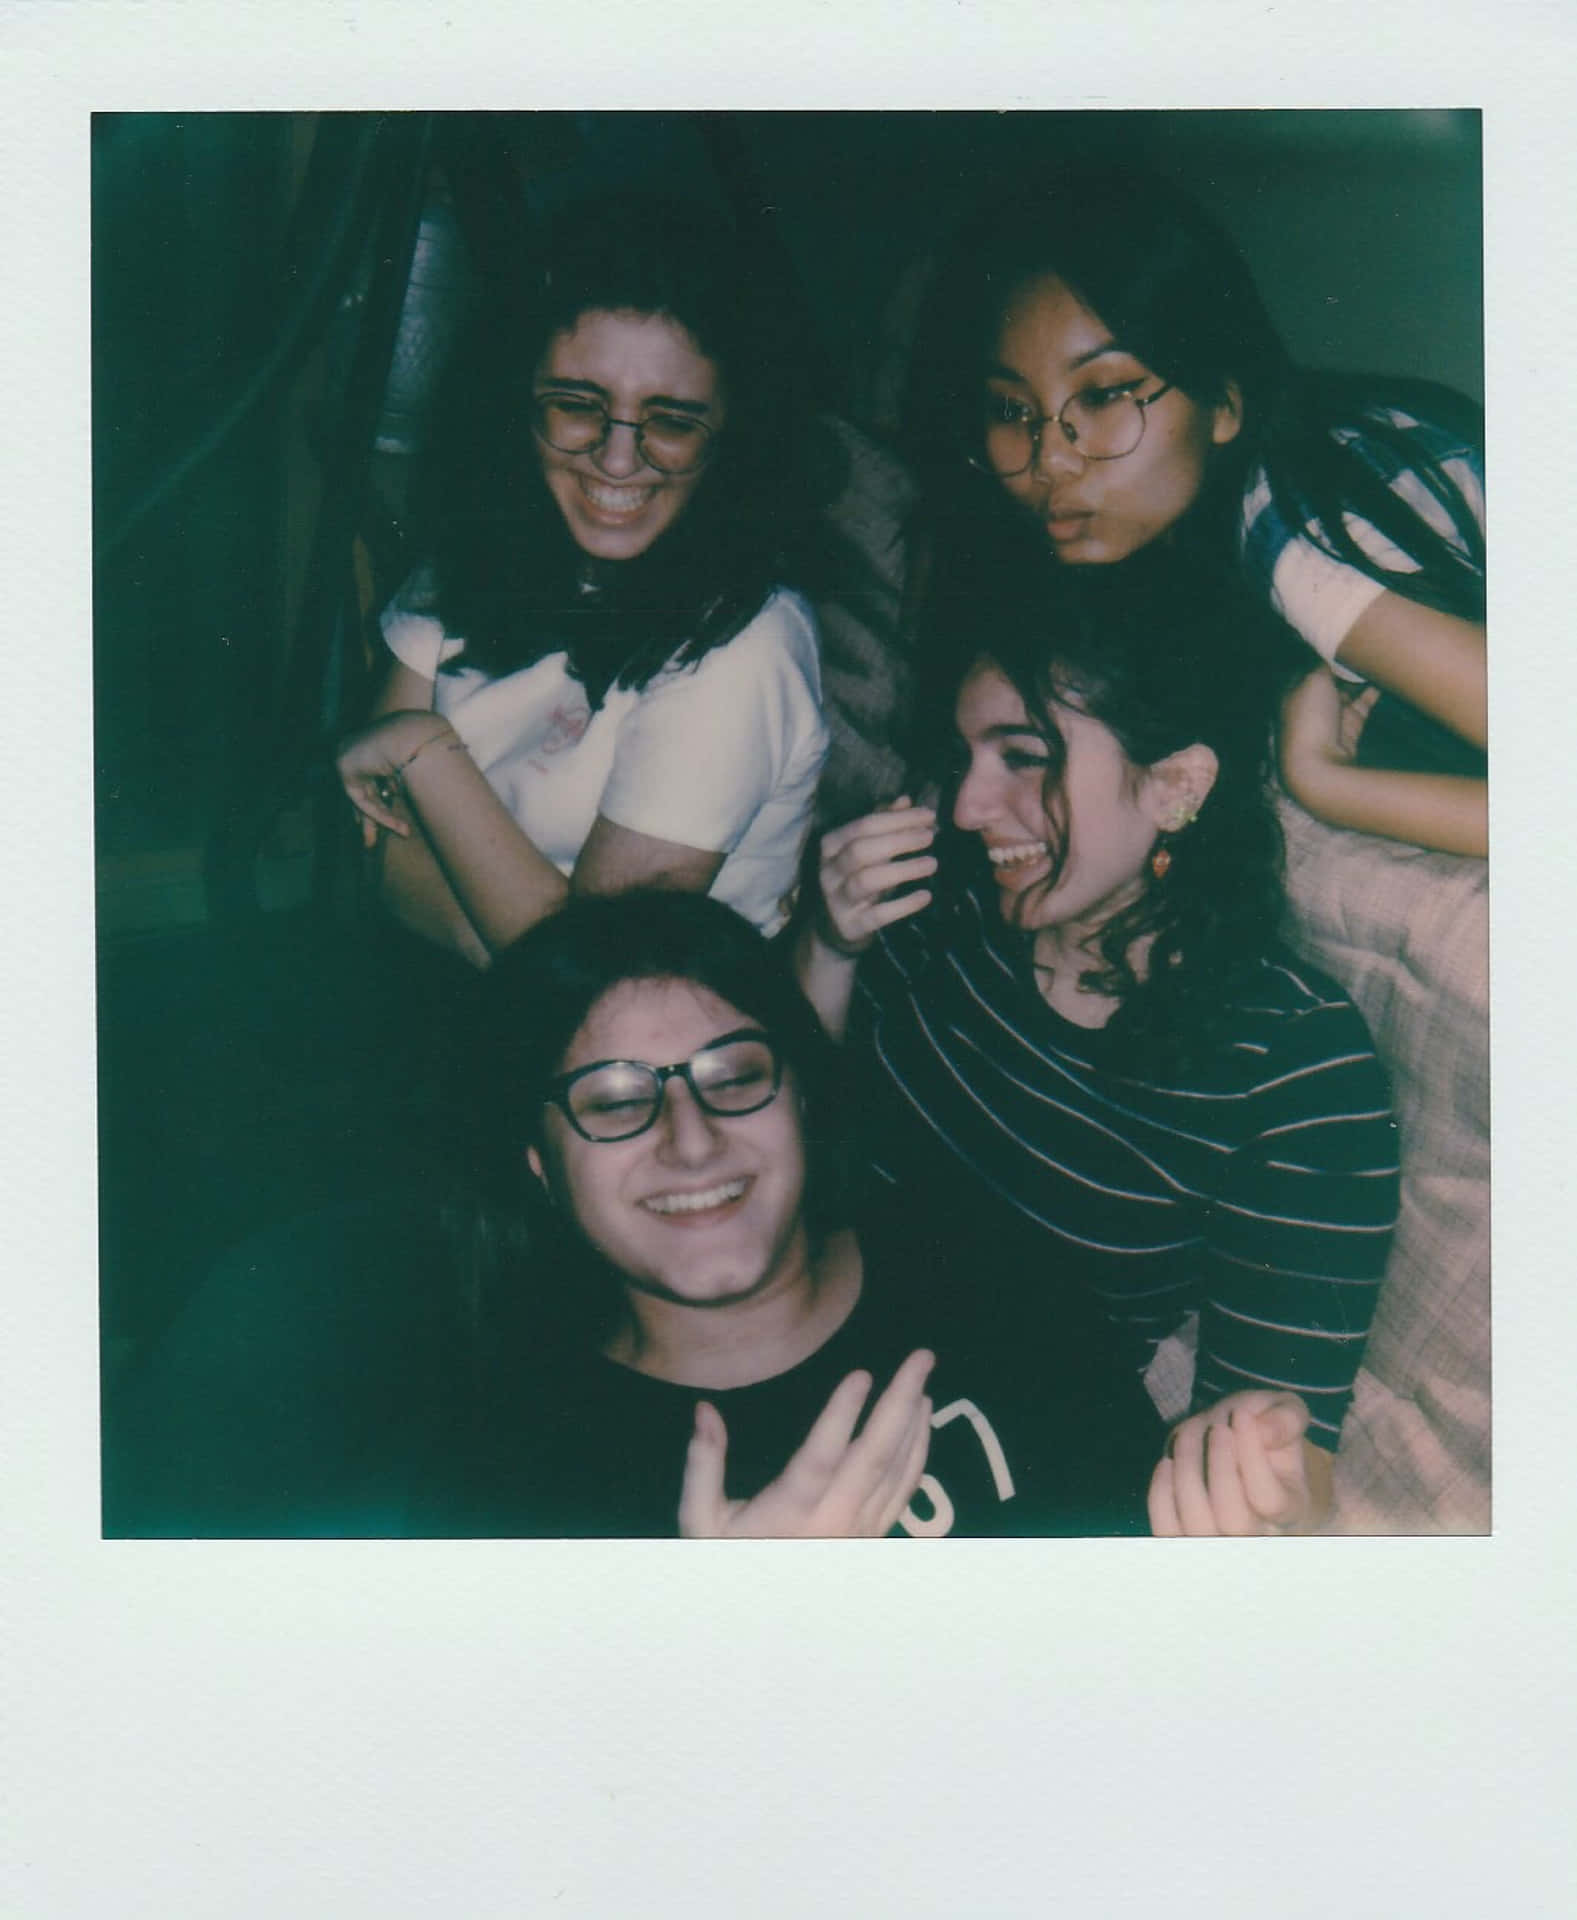 Captivating Retro Aesthetic Of Mature Teenagers With A Polaroid. Background